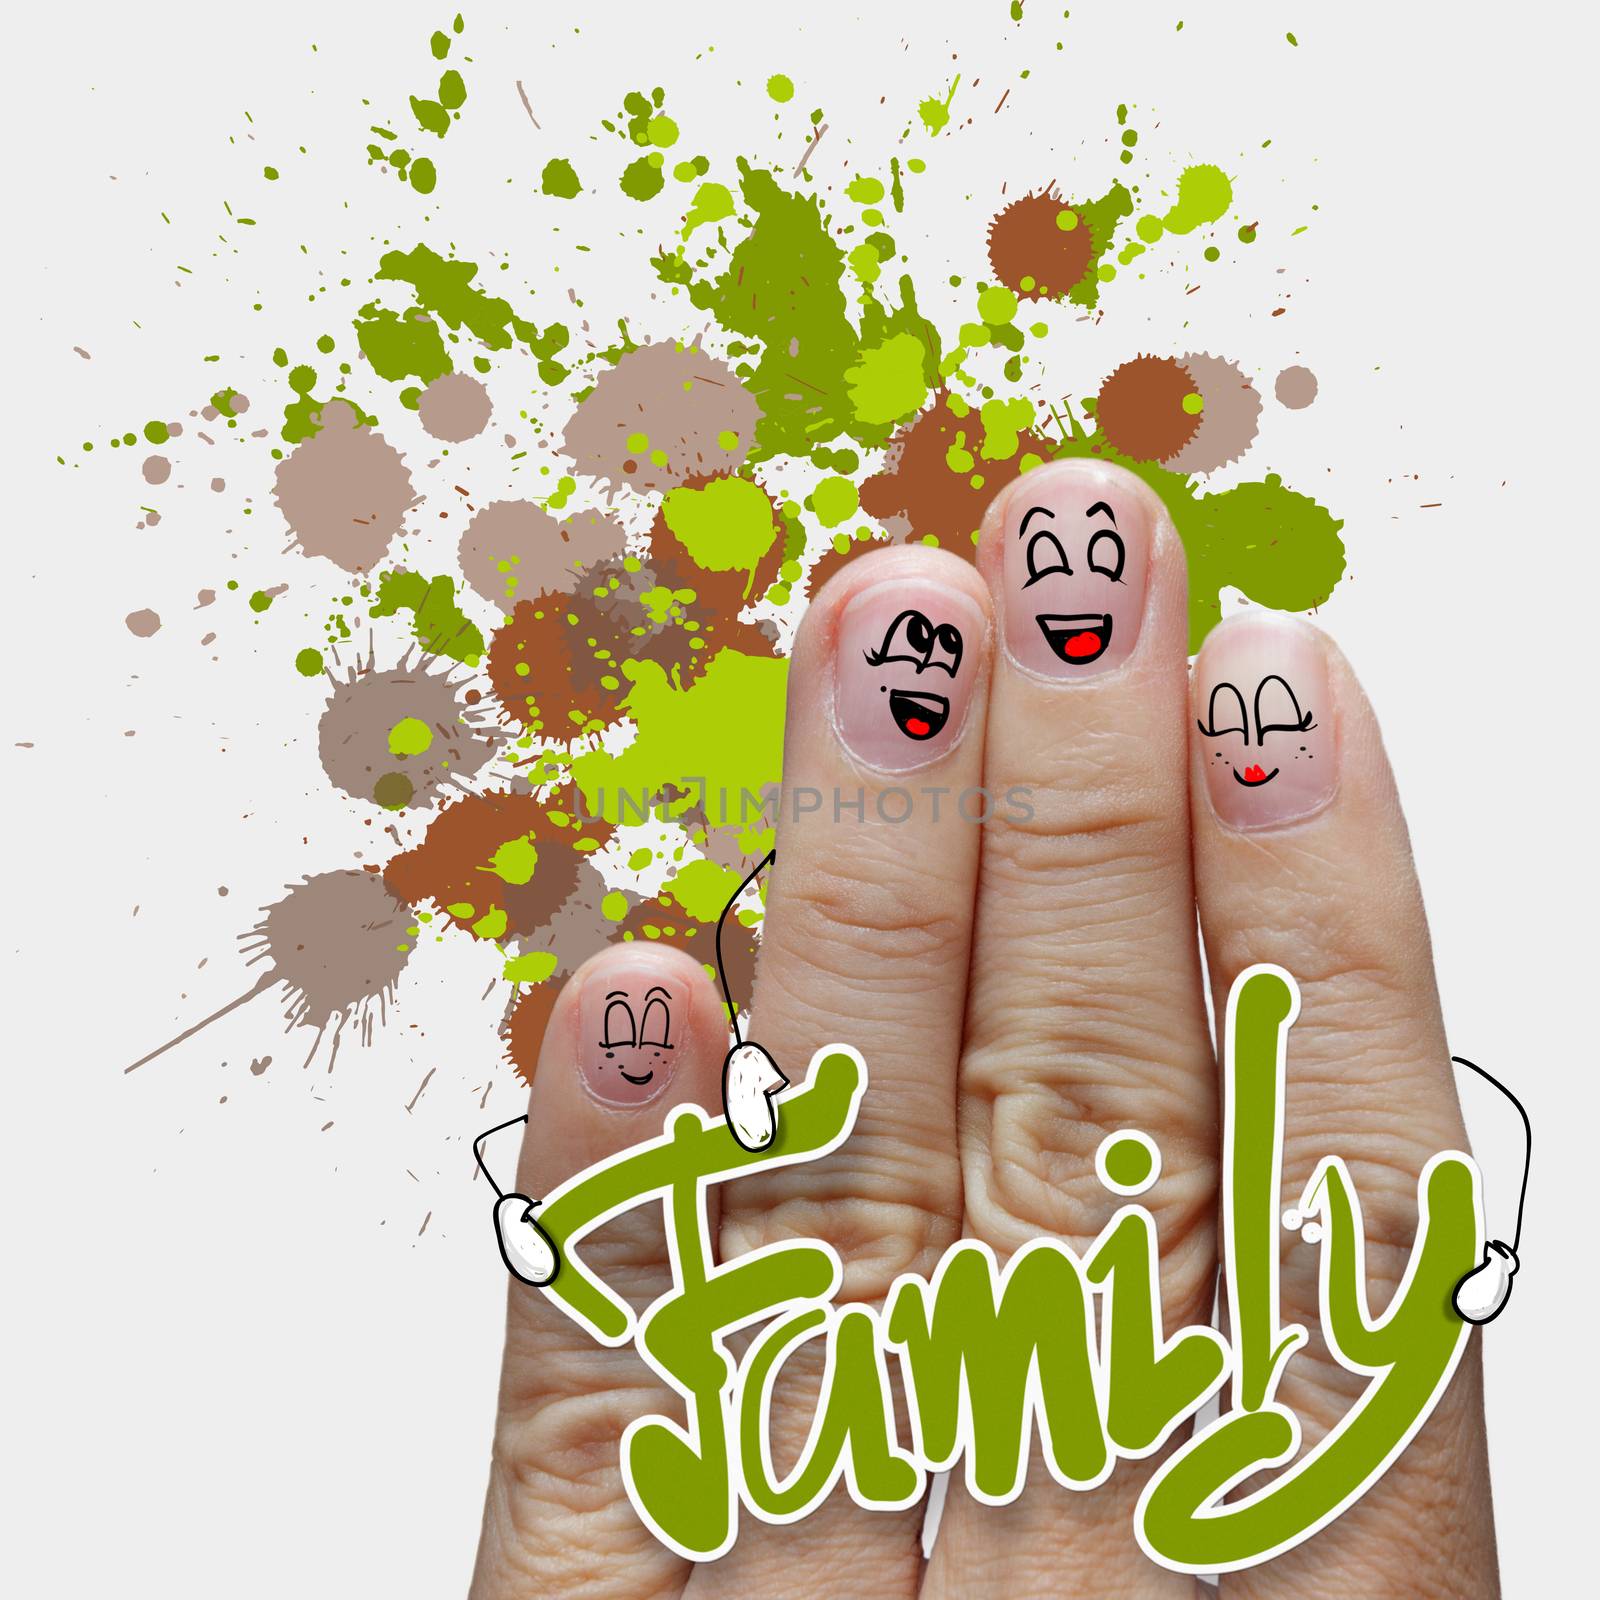 the happy finger family holding family word on splash colors background